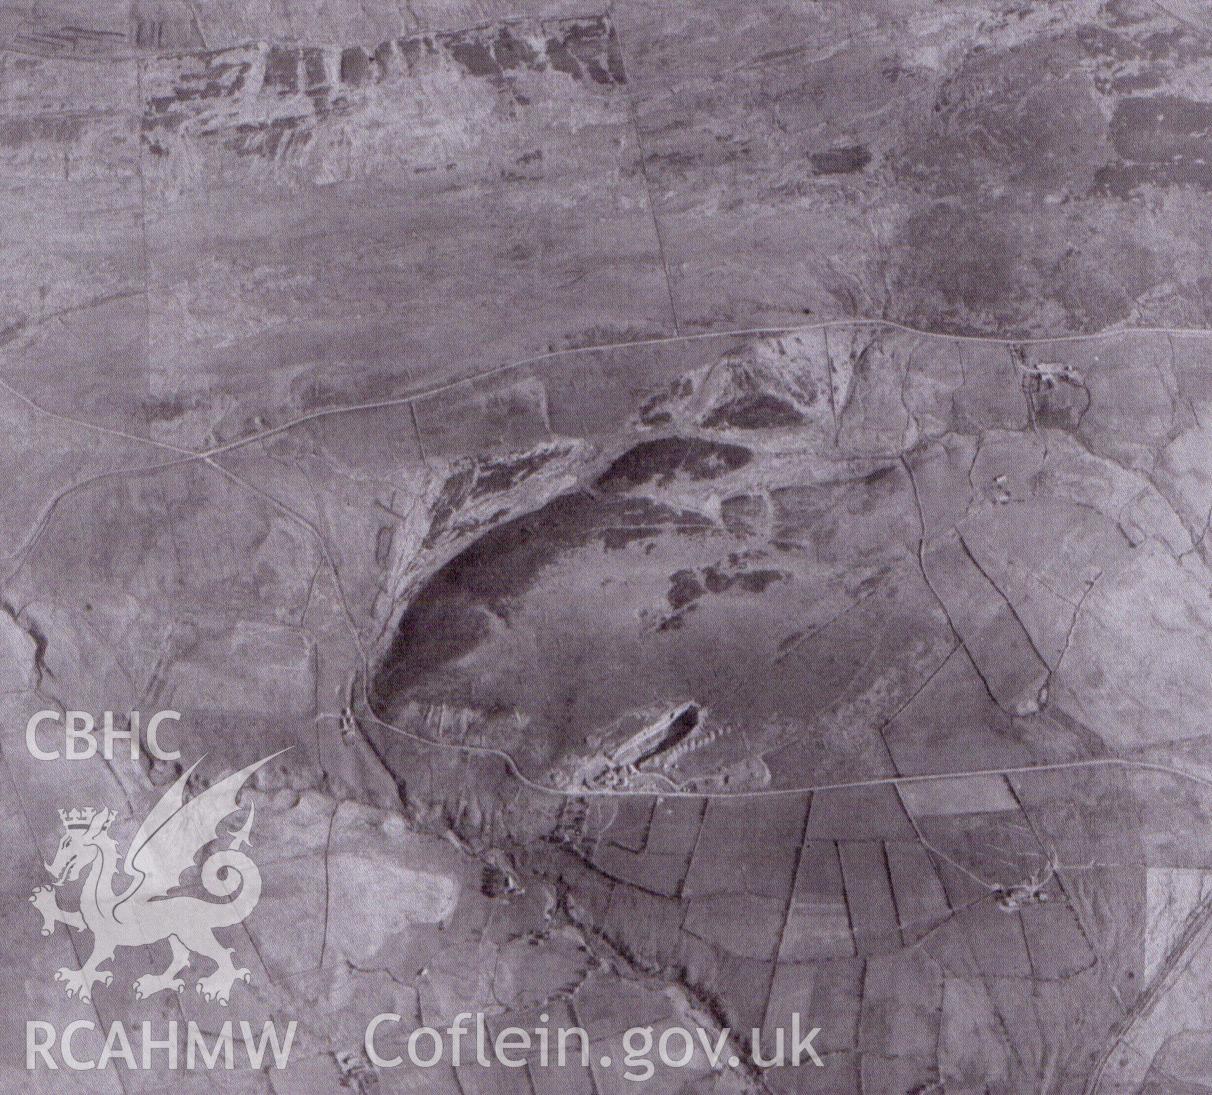 1947 Aerial photograph showing assessment area for Tan y Foel Quarry, Cefn Coch, report no. 1089.